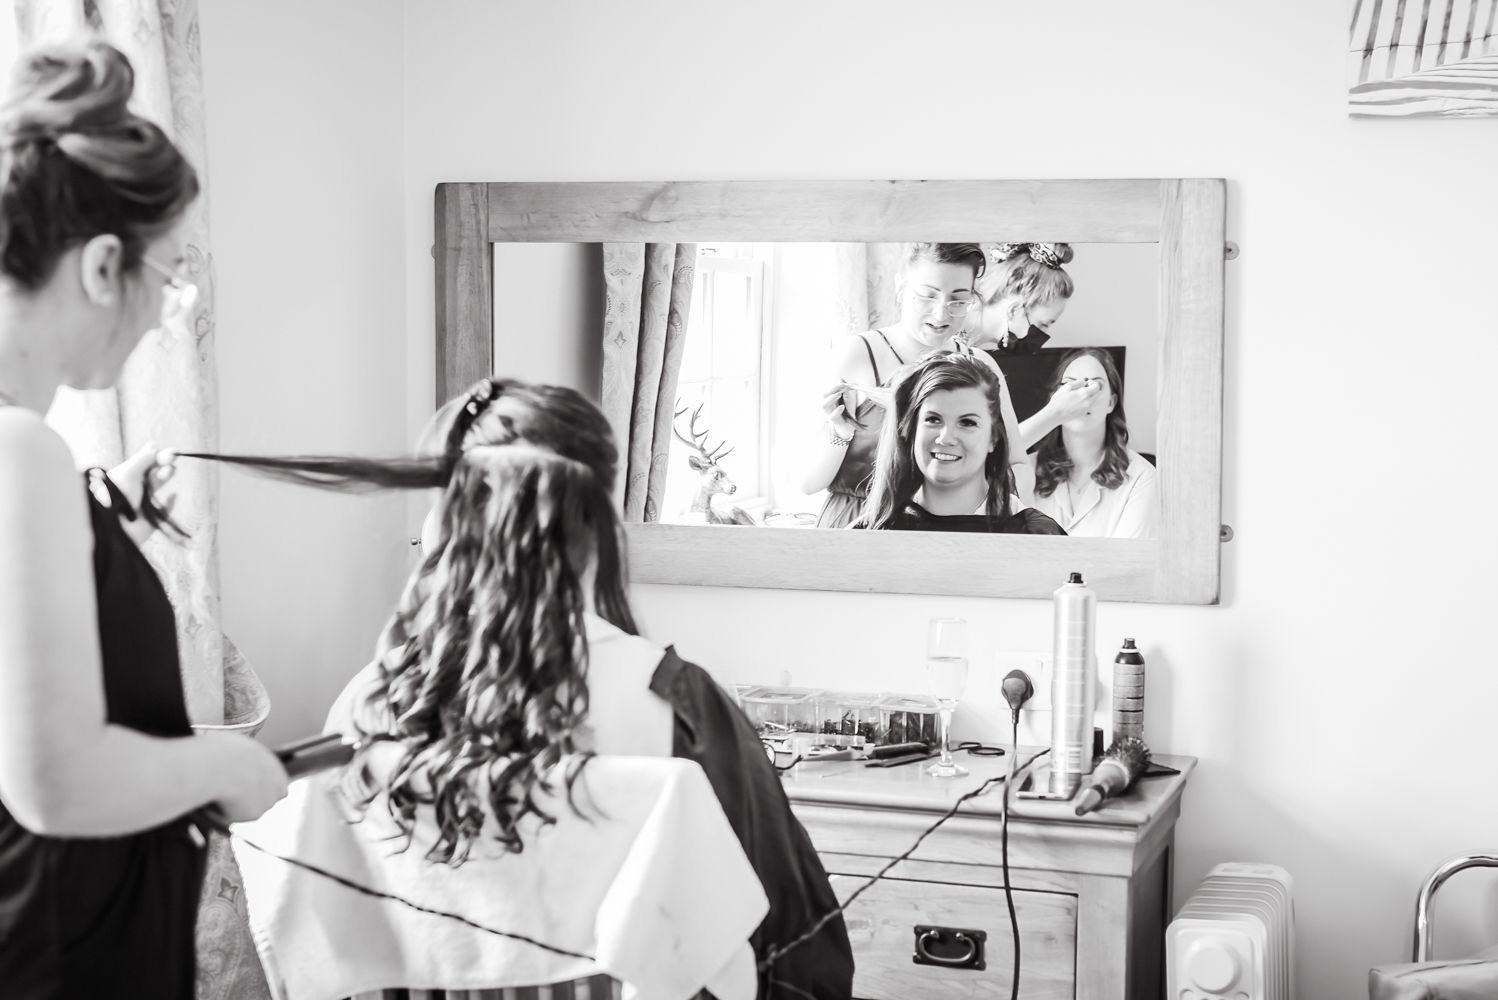 The bride is photographed from behind while she has her hair done on her wedding day. In the reflection of the mirror we can see her smiling face and her maid of honour having her make up done too.